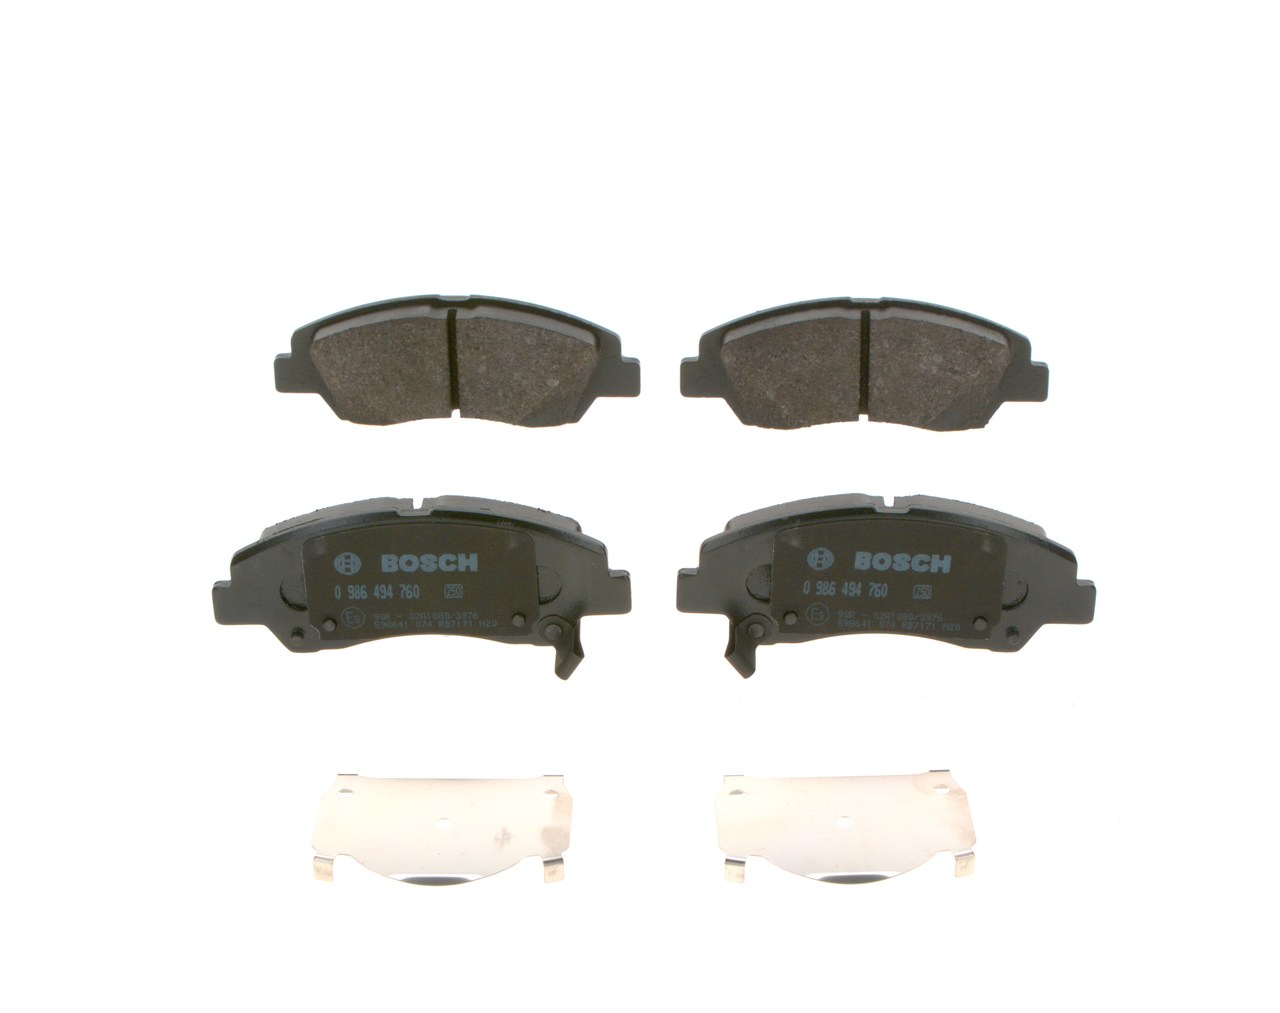 BOSCH 0 986 494 760 Brake pad set Low-Metallic, with integrated wear warning contact